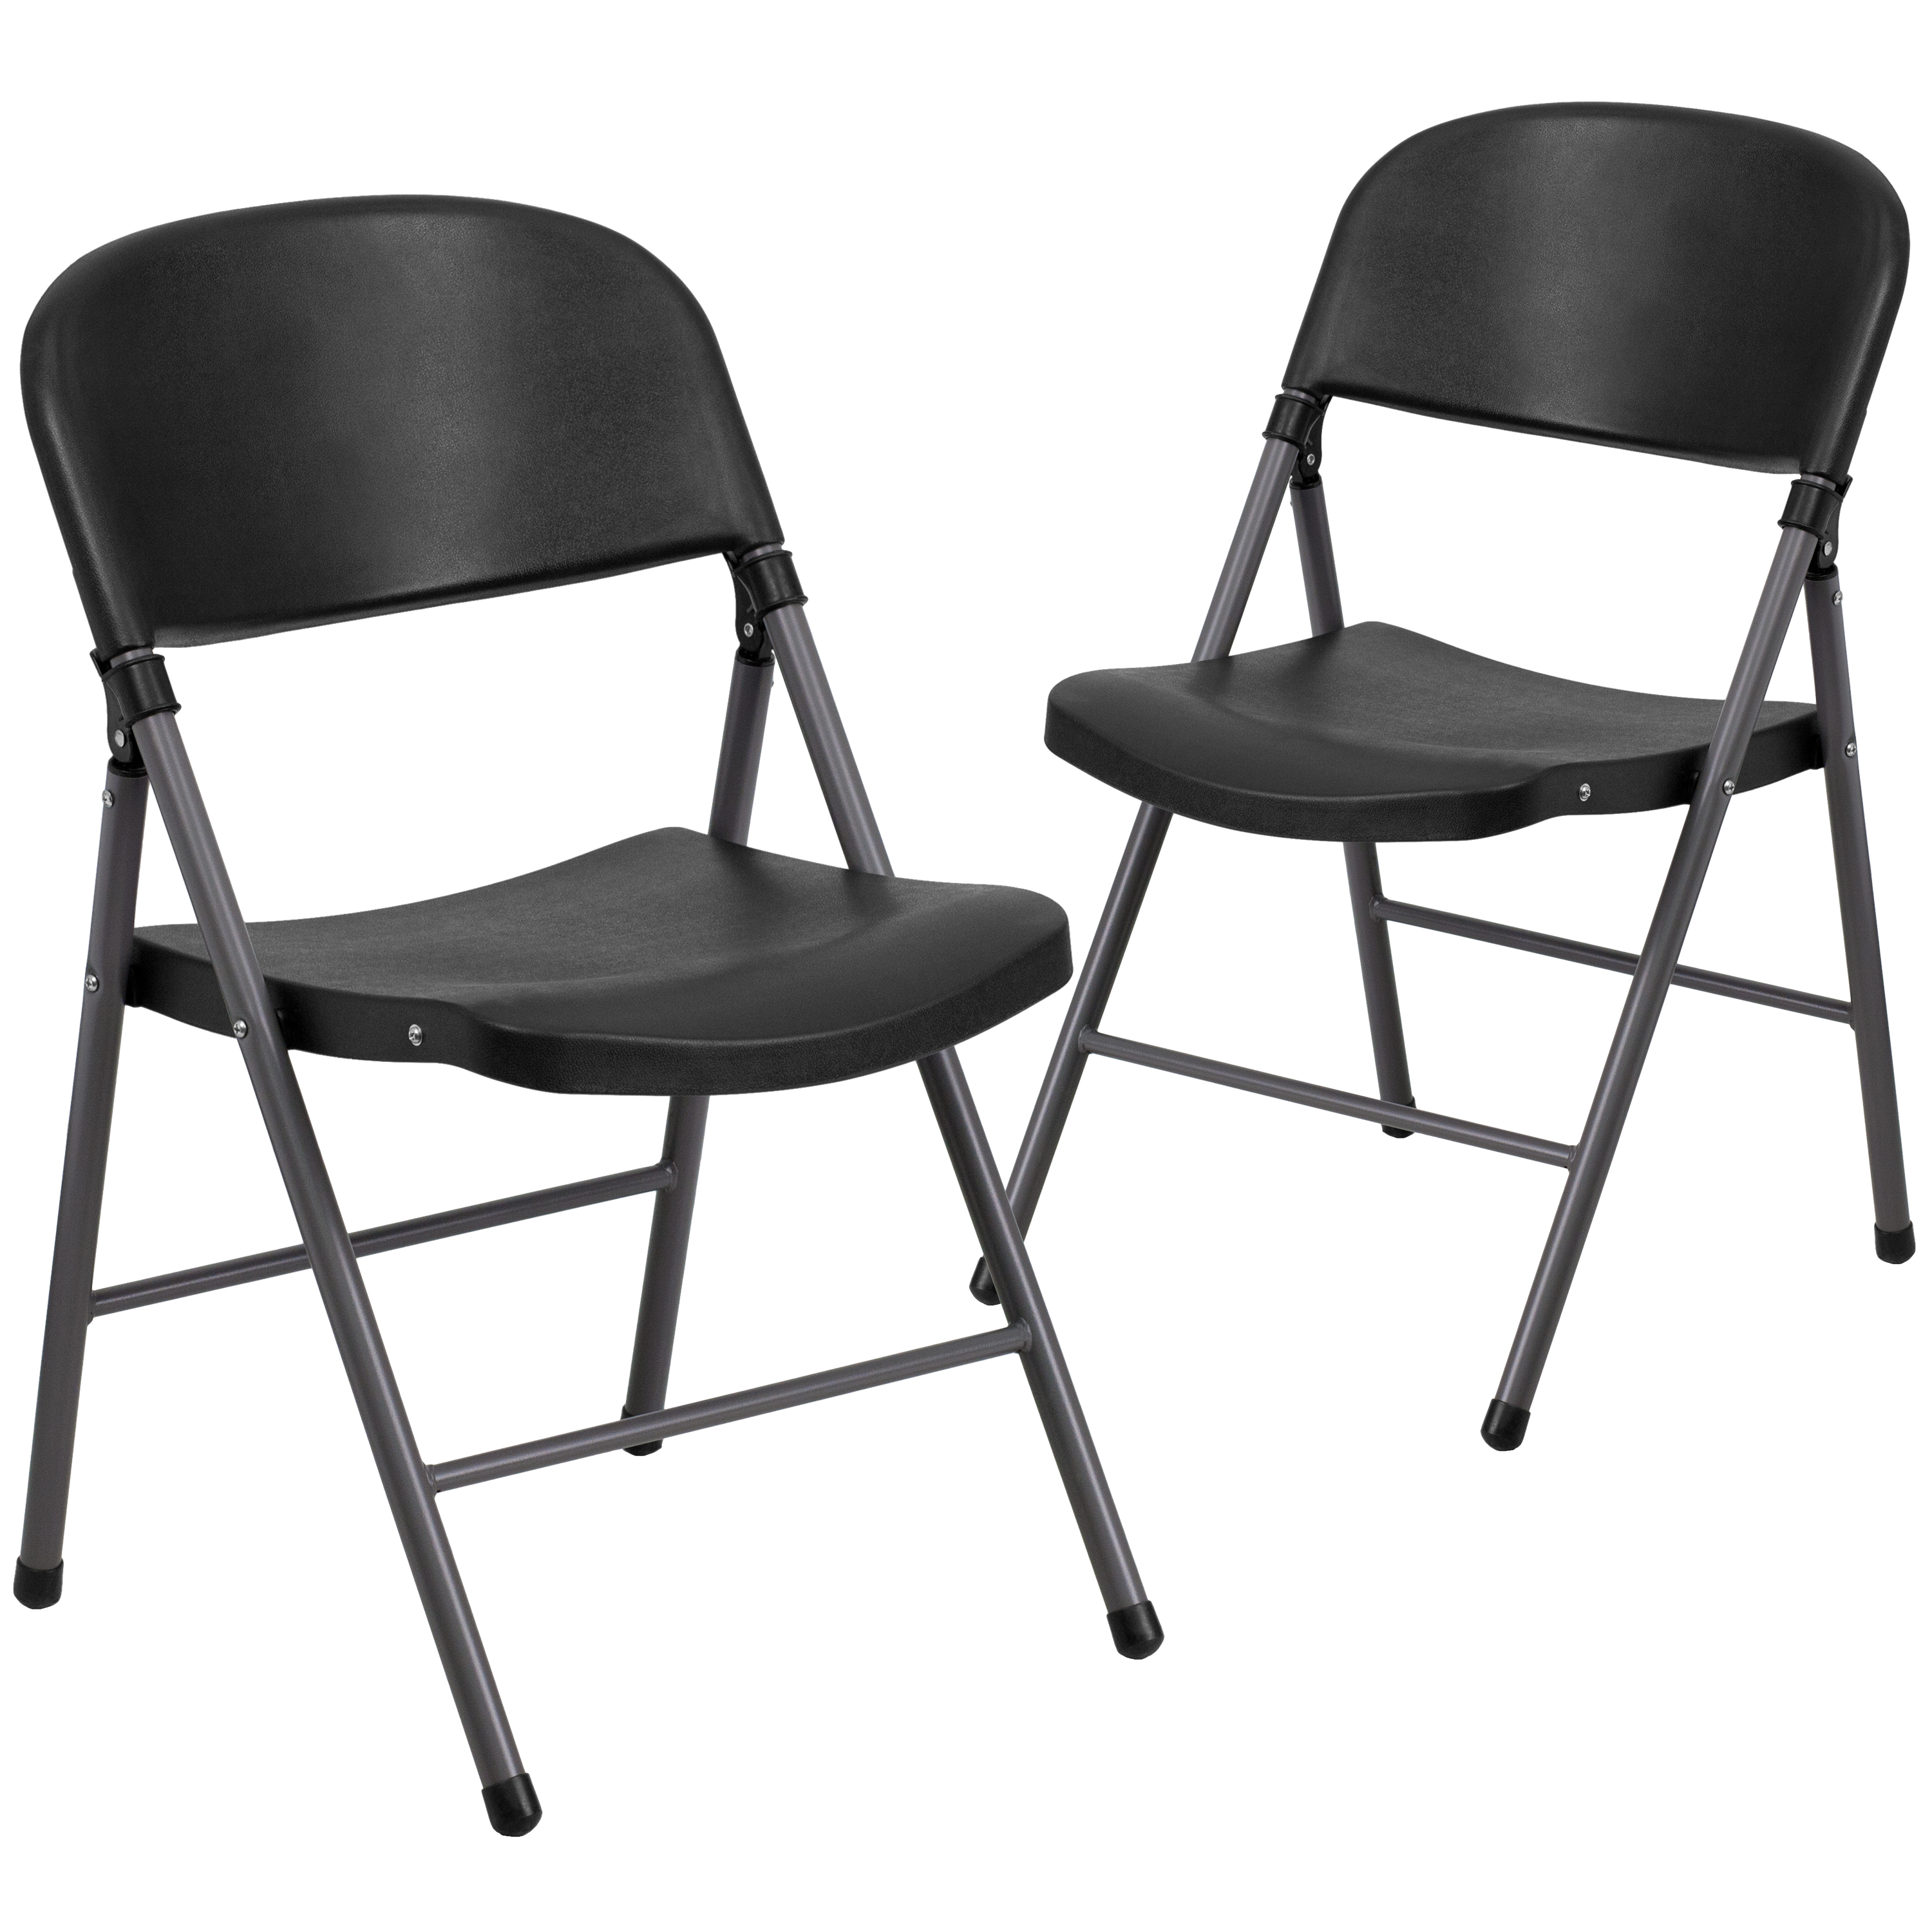 Flash Furniture 2 Pack HERCULES Series 330 lb. Capacity Black Plastic Folding Chair with Charcoal Frame - image 1 of 14